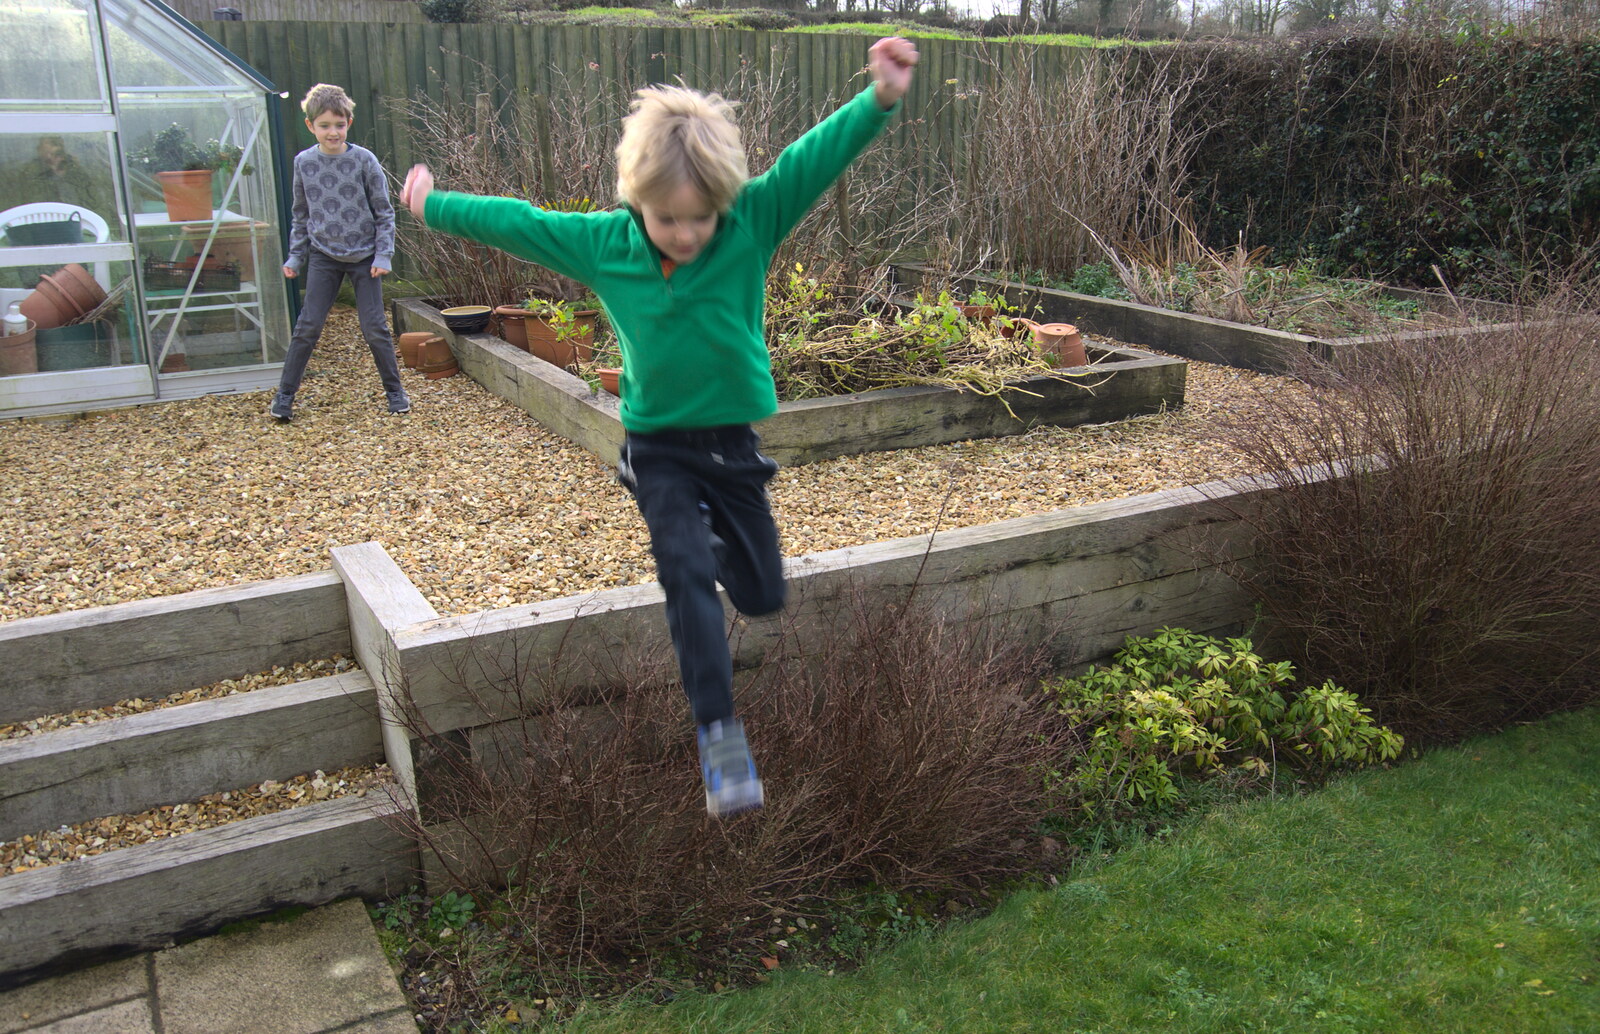 Harry jumps off the sleeper wall from Killerton House, Broadclyst, Devon - 30th December 2017